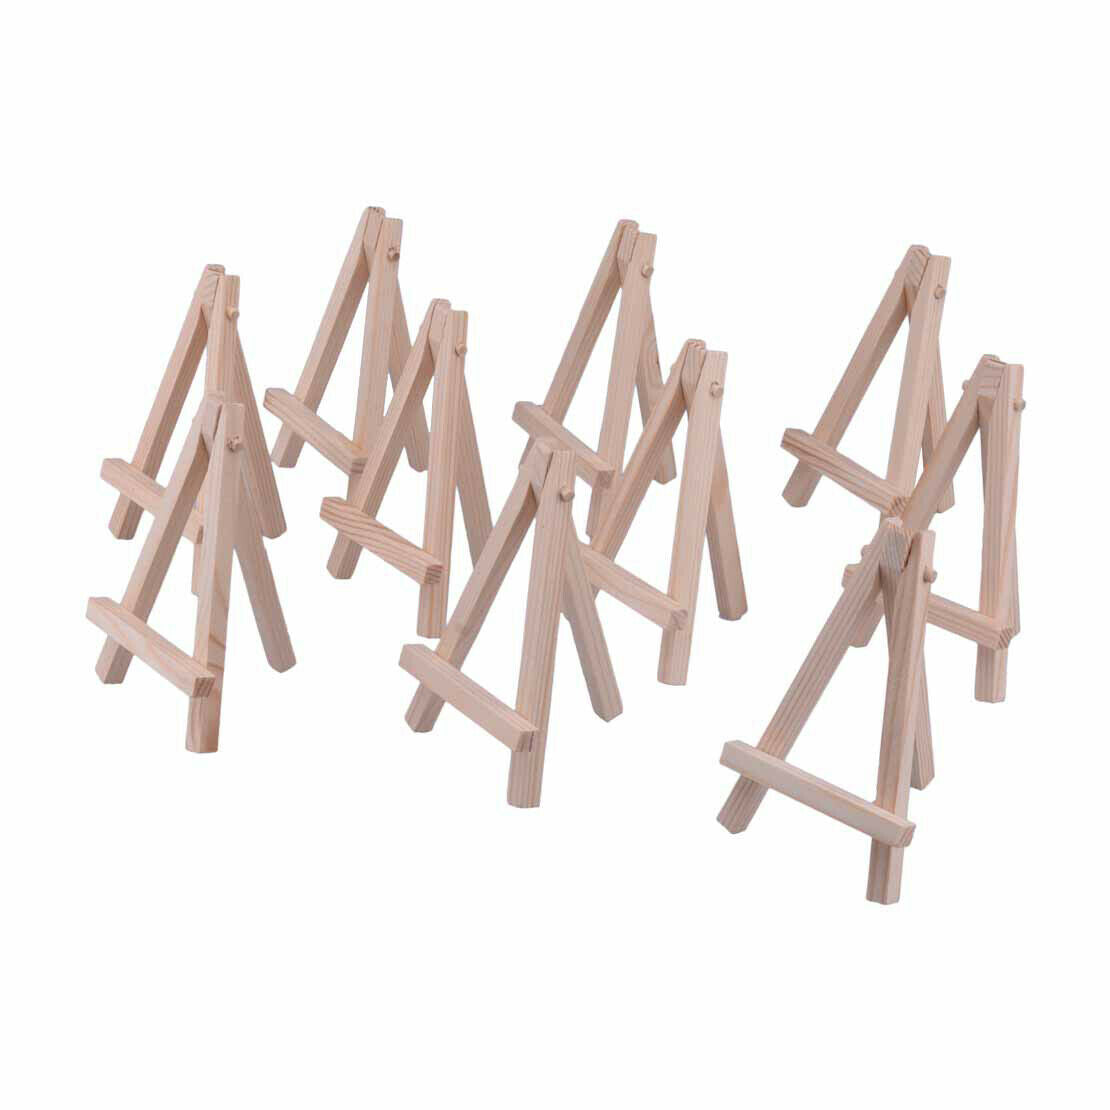 10pcs Mini Wooden Easel Triangle Table Holder Artist Stand Name Card Display An